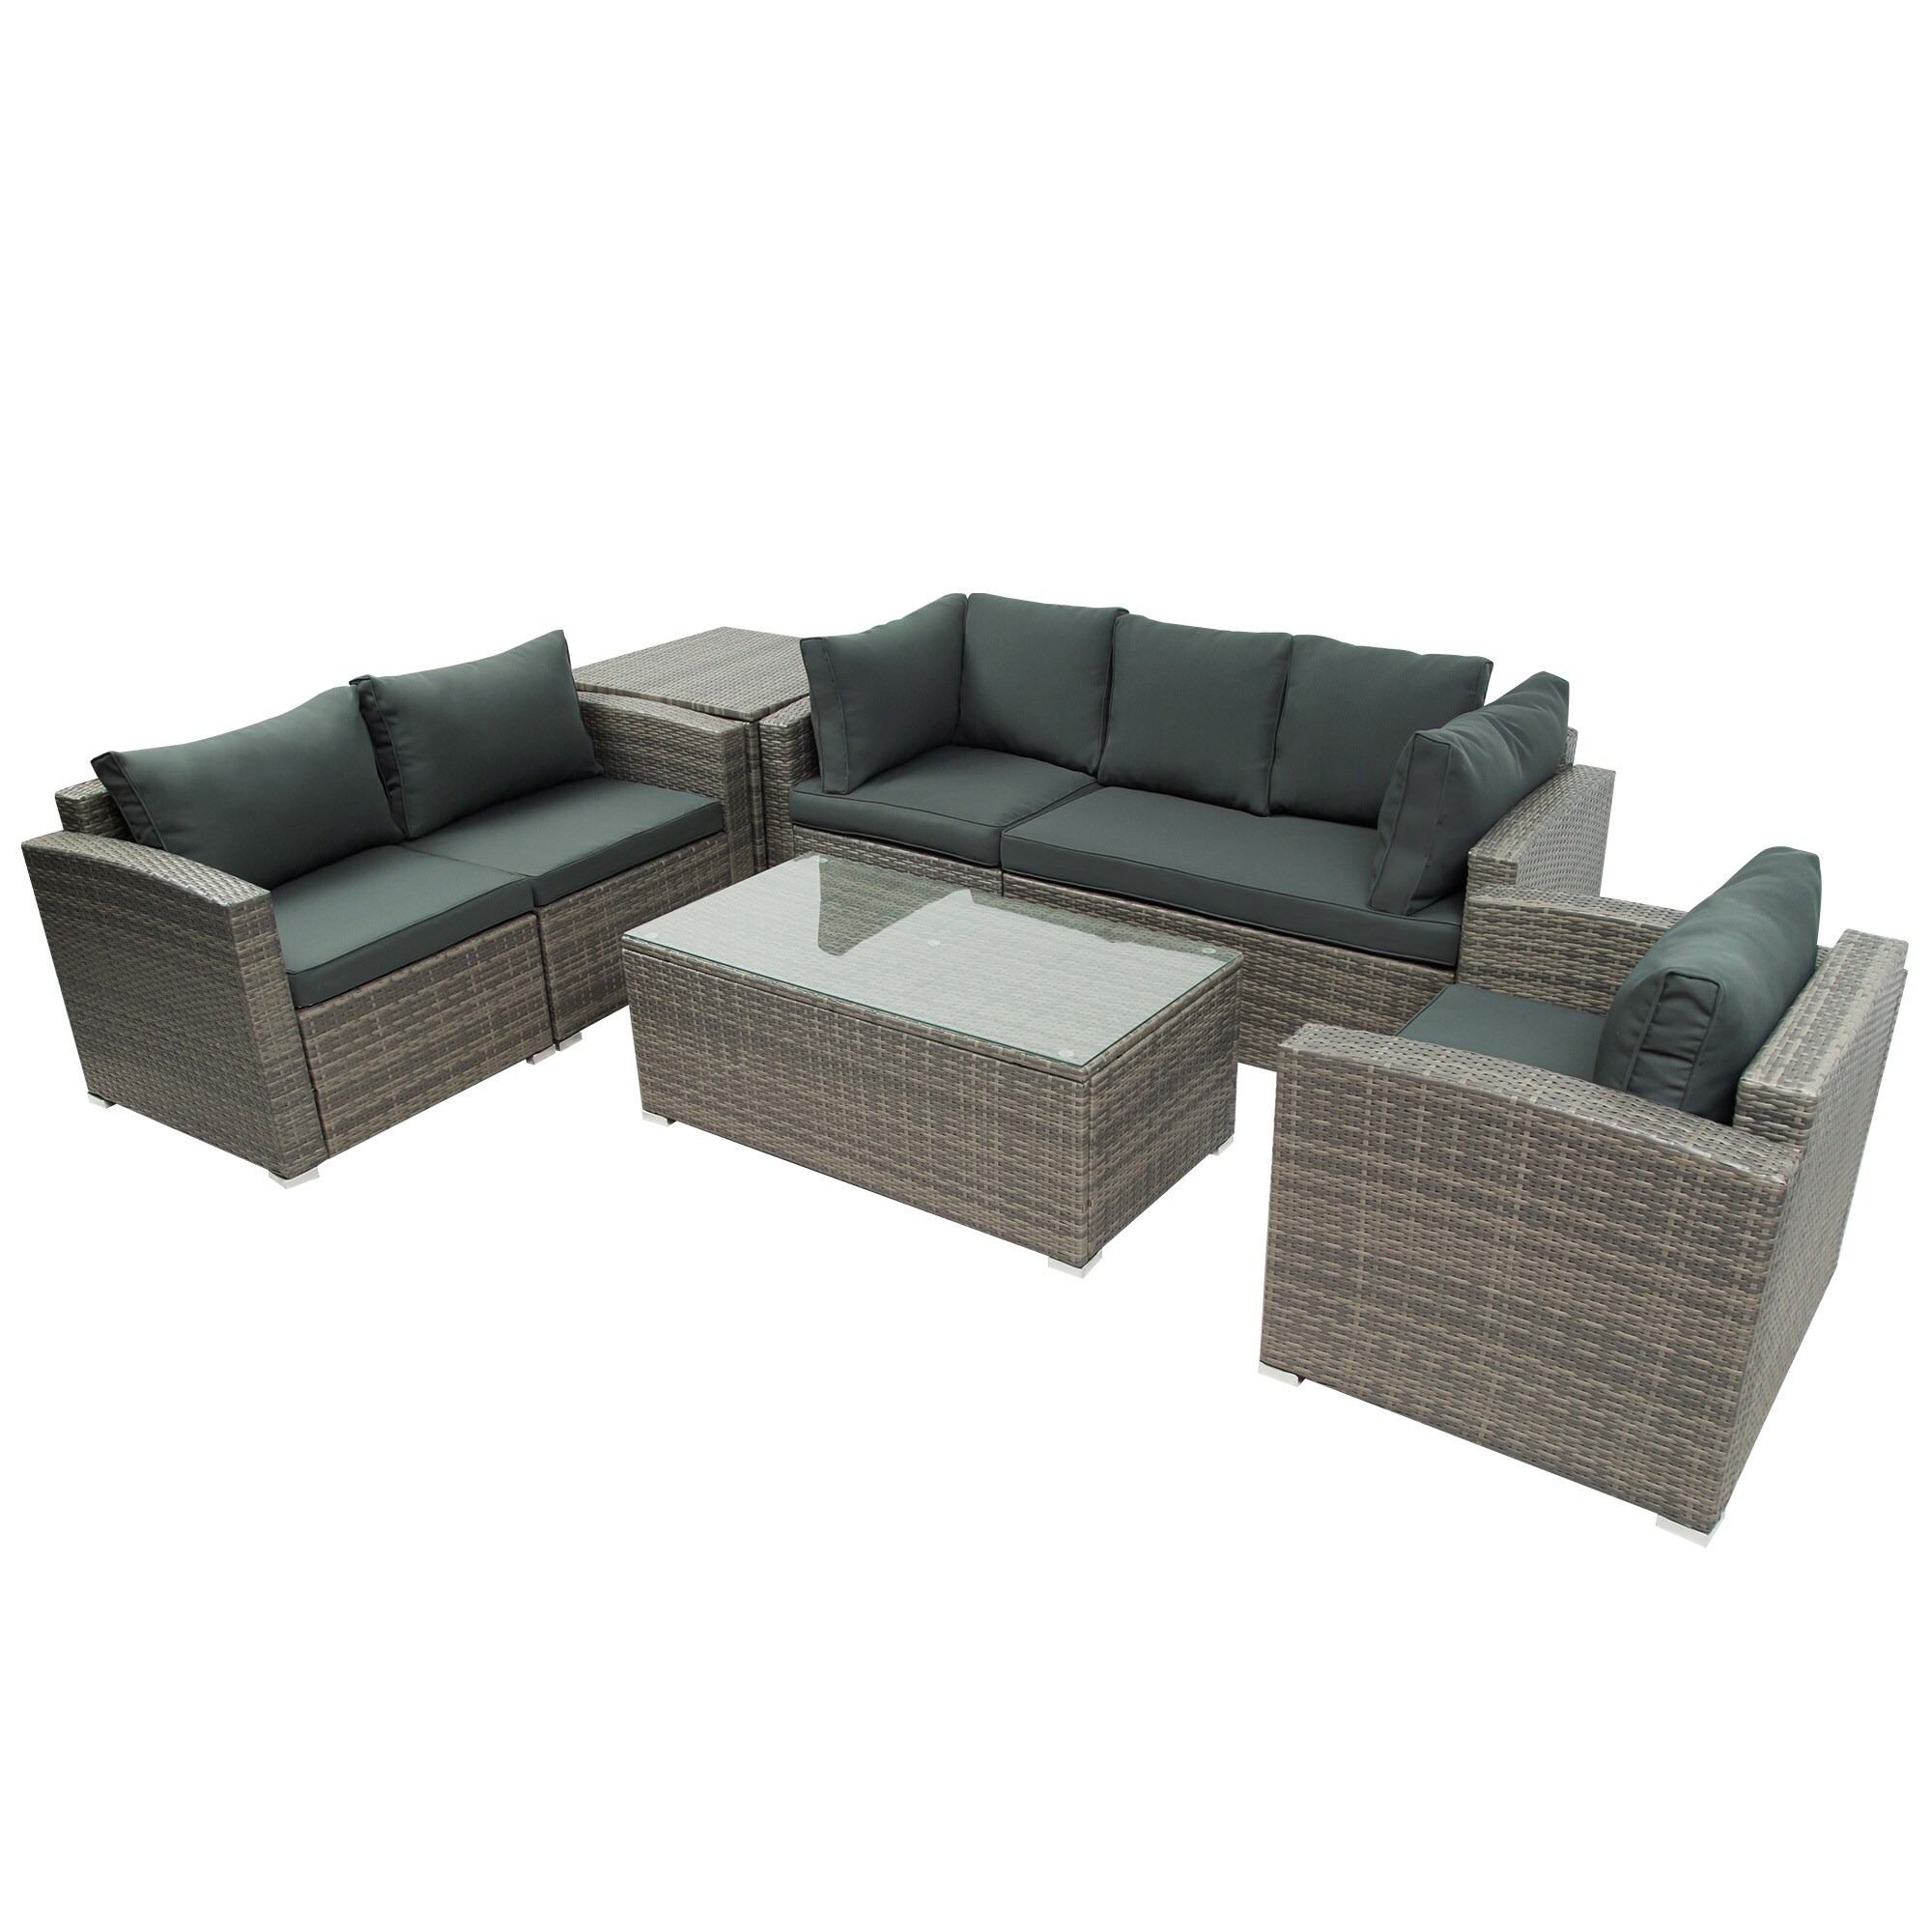 7-piece Patio Wicker Sofa Furniture Sets With Cushions